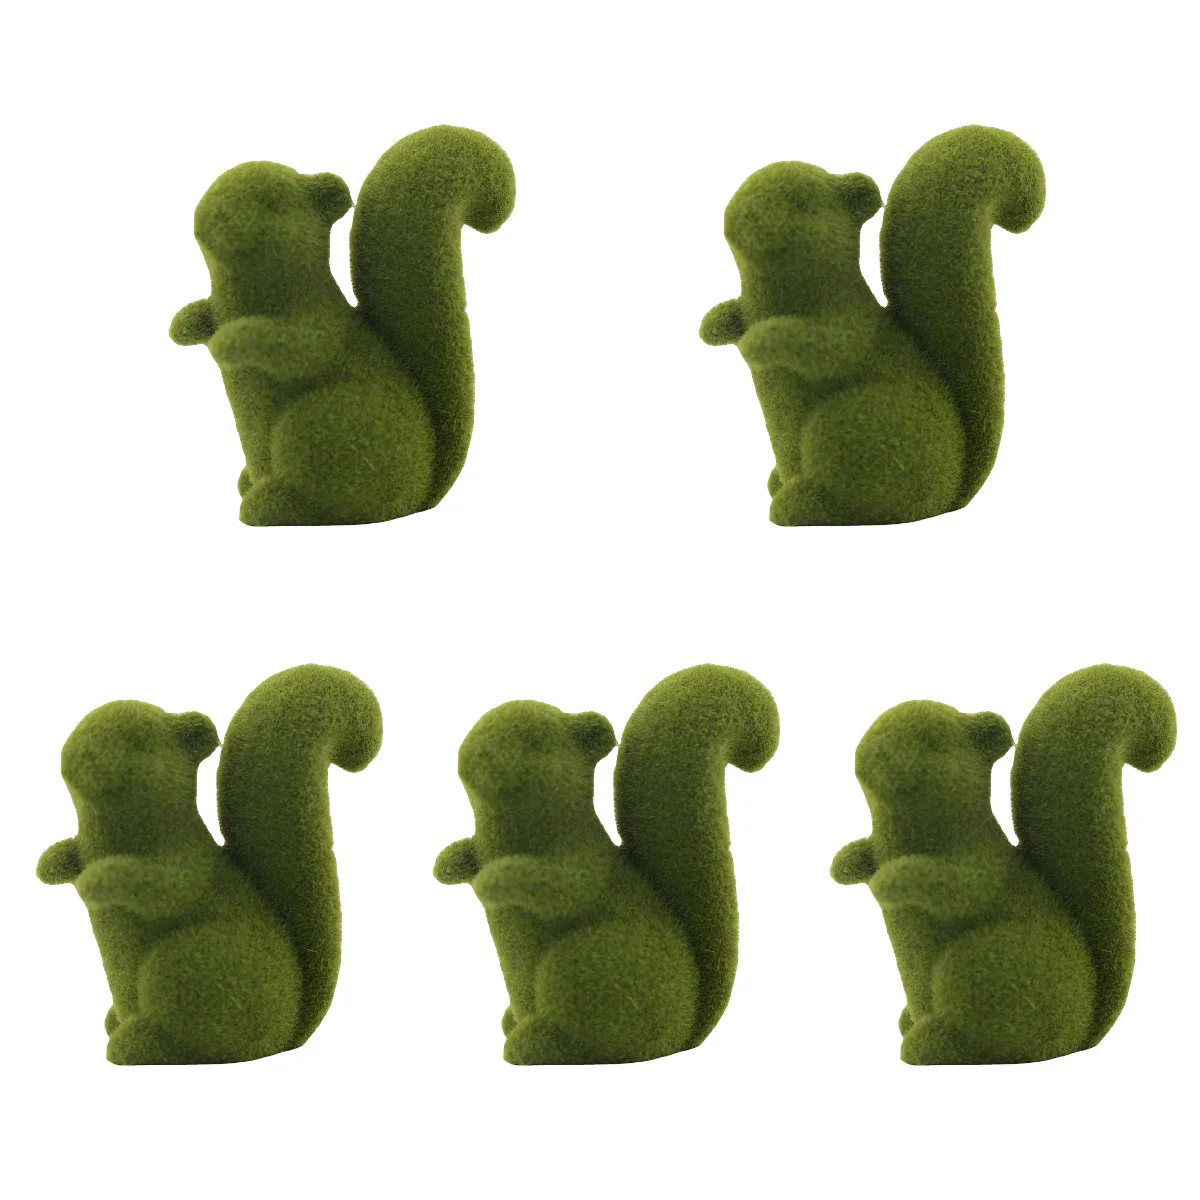 

5x Lovely Statue Decorative Resin Squirrel Squirrel Model Decorative Squirrel Statue Garden Squirrel Statue